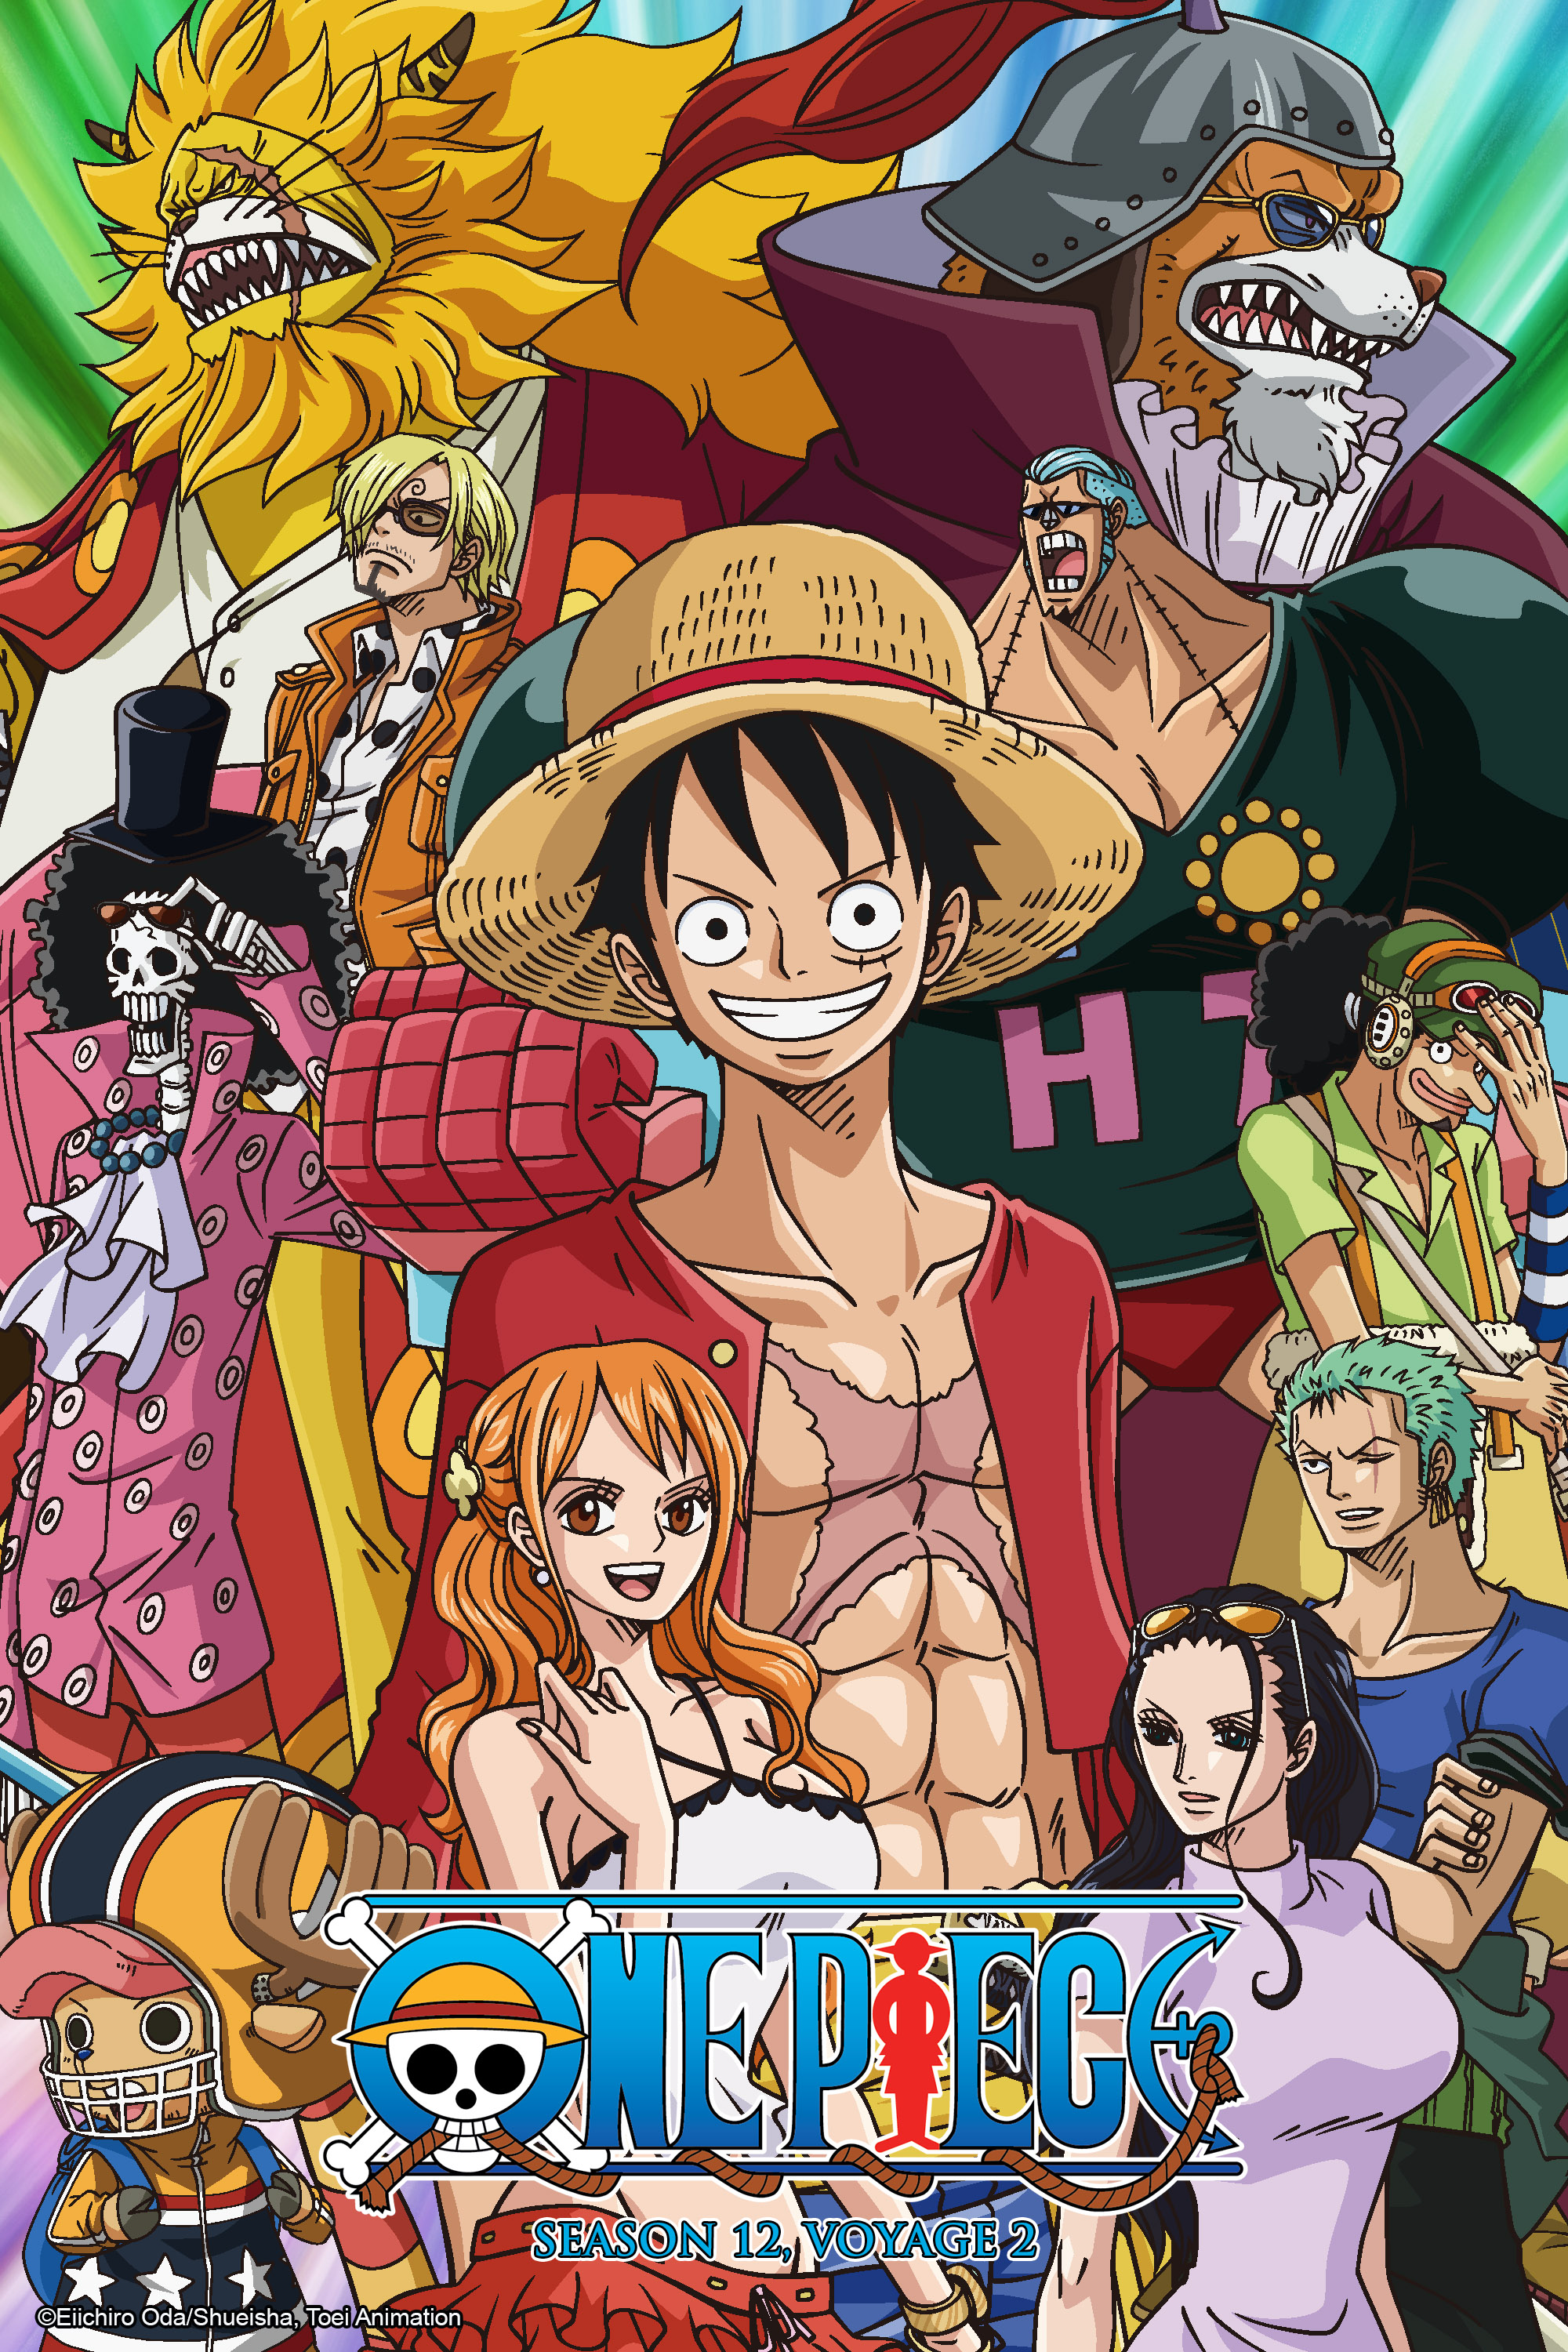 Toei Animation - So many grand adventures for the Straw Hats